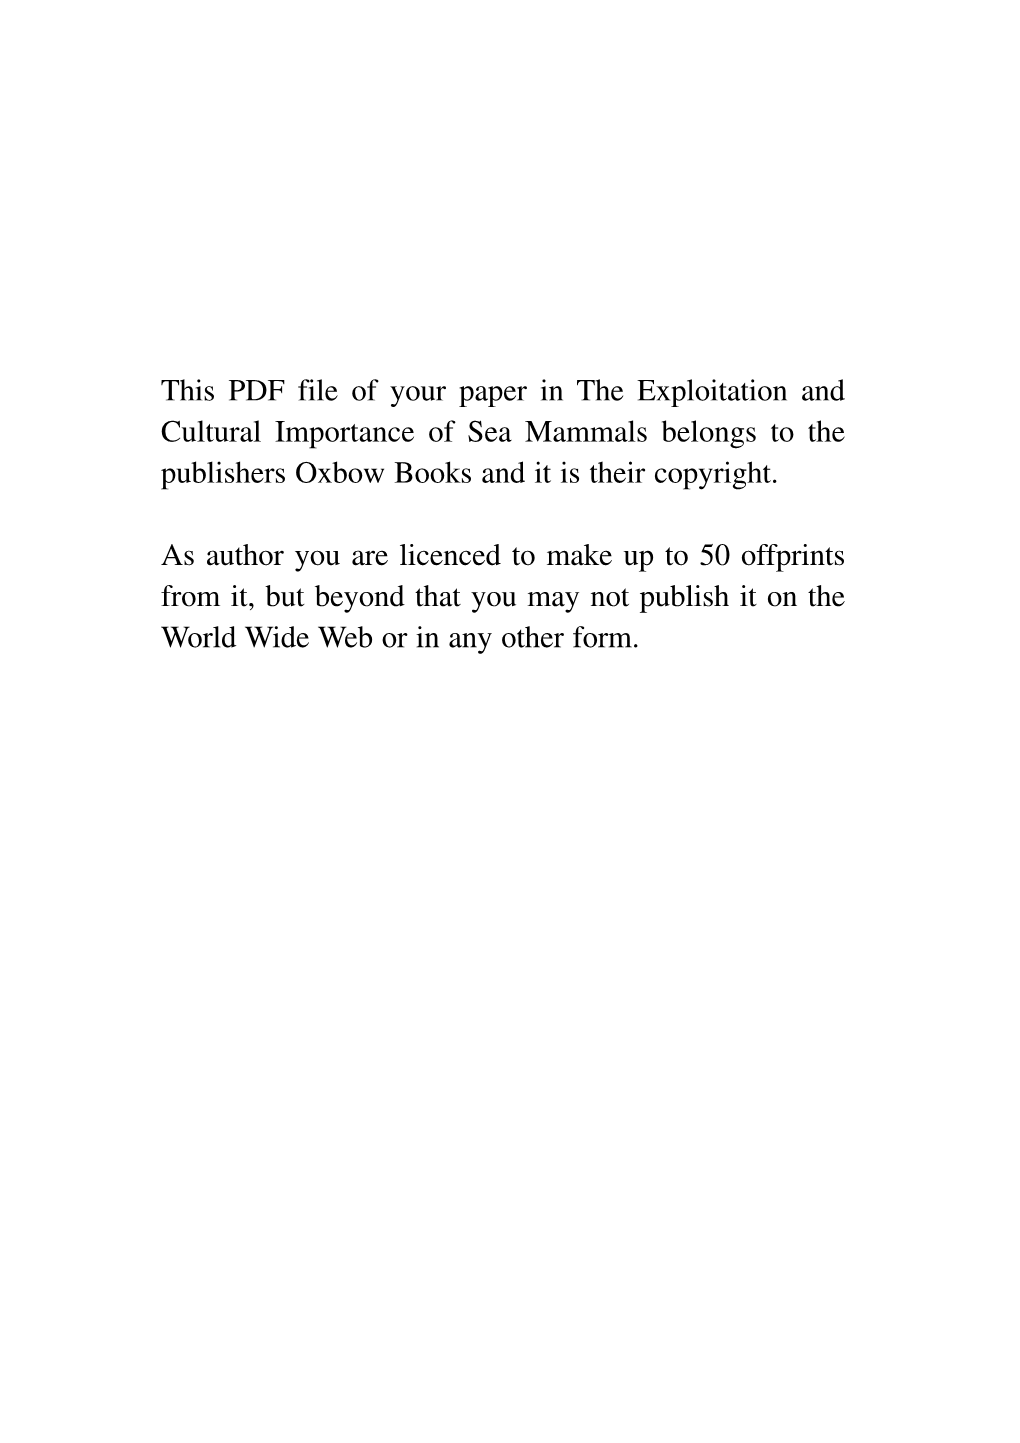 PDF File of Your Paper in the Exploitation and Cultural Importance of Sea Mammals Belongs to the Publishers Oxbow Books and It Is Their Copyright